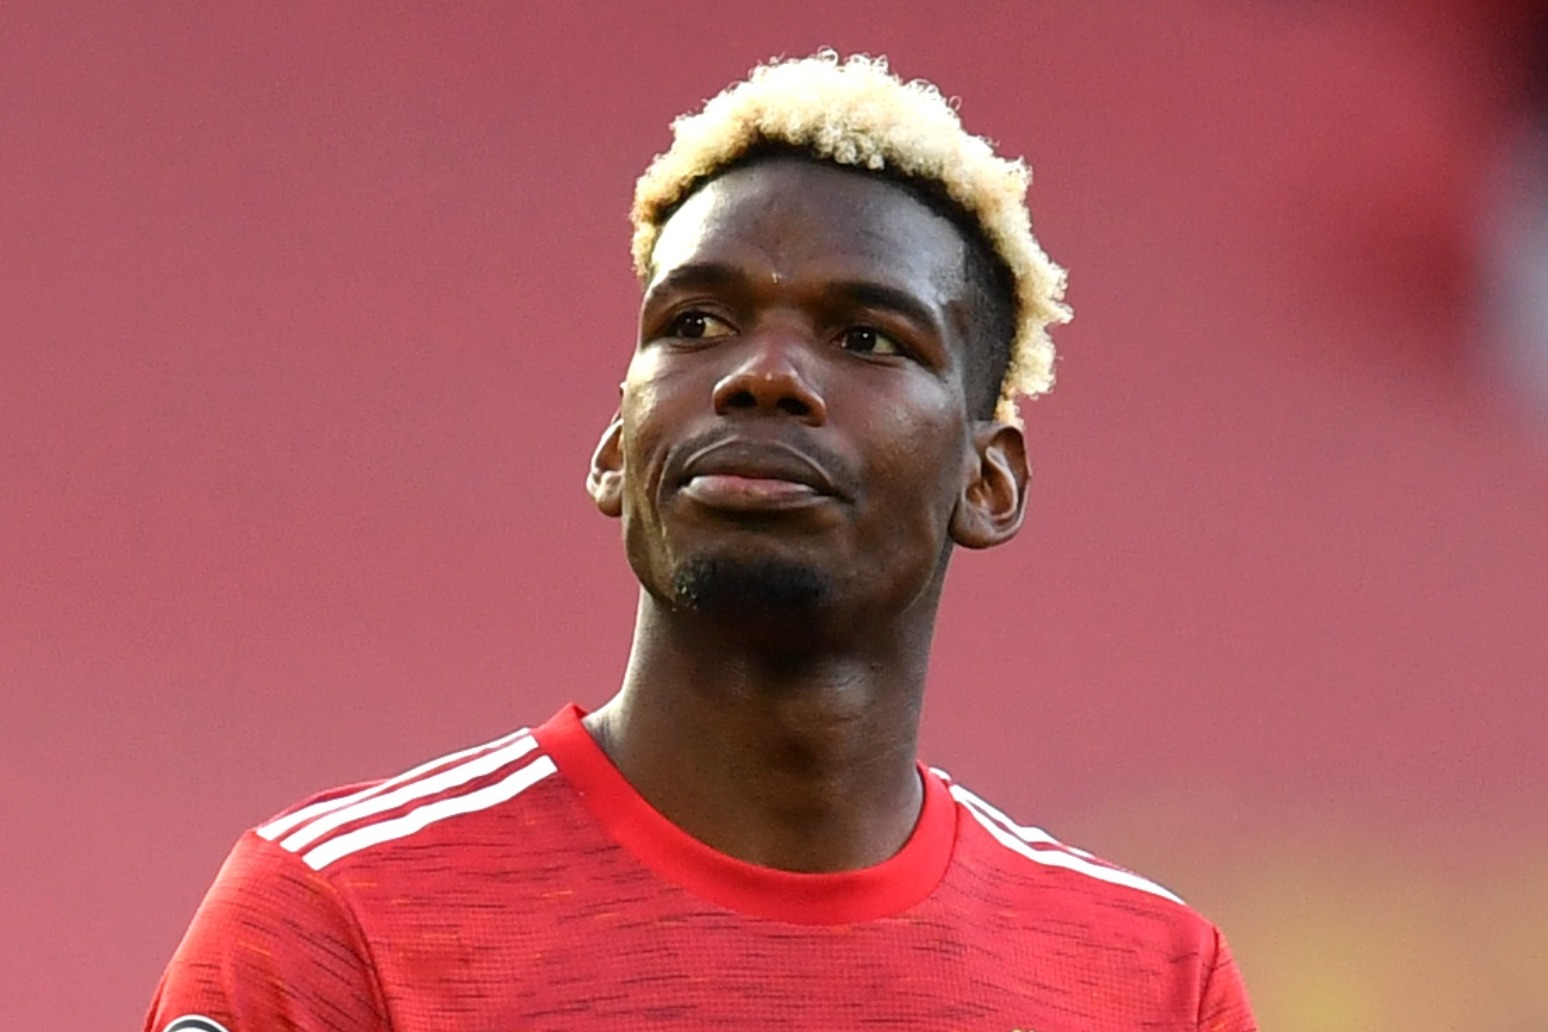 Brother’s alleged extortion video prompts response from footballer Paul Pogba 